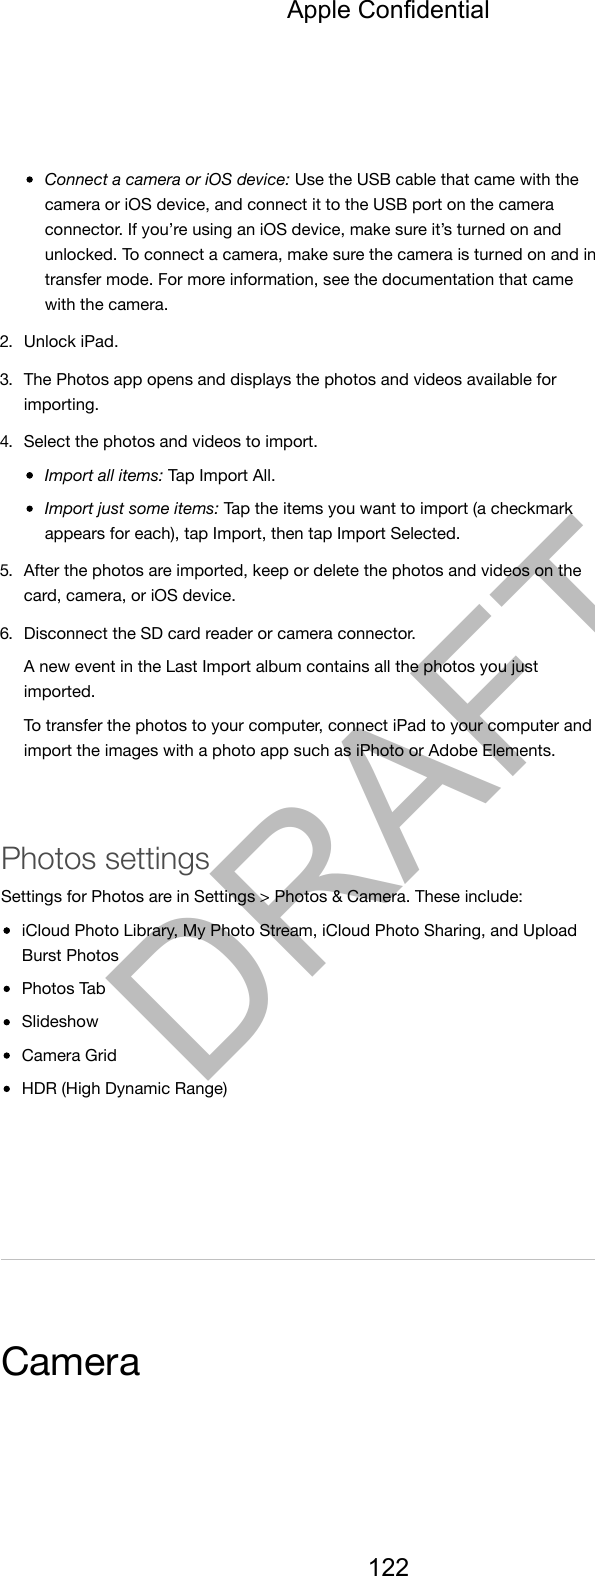 Connect a camera or iOS device: Use the USB cable that came with thecamera or iOS device, and connect it to the USB port on the cameraconnector. If you’re using an iOS device, make sure it’s turned on andunlocked. To connect a camera, make sure the camera is turned on and intransfer mode. For more information, see the documentation that camewith the camera.2. Unlock iPad.3. The Photos app opens and displays the photos and videos available forimporting.4. Select the photos and videos to import.Import all items: Tap Import All.Import just some items: Tap the items you want to import (a checkmarkappears for each), tap Import, then tap Import Selected.5. After the photos are imported, keep or delete the photos and videos on thecard, camera, or iOS device.6. Disconnect the SD card reader or camera connector.A new event in the Last Import album contains all the photos you justimported.To transfer the photos to your computer, connect iPad to your computer andimport the images with a photo app such as iPhoto or Adobe Elements.Photos settingsSettings for Photos are in Settings &gt; Photos &amp; Camera. These include:iCloud Photo Library, My Photo Stream, iCloud Photo Sharing, and UploadBurst PhotosPhotos TabSlideshowCamera GridHDR (High Dynamic Range)CameraApple Confidential122DRAFT